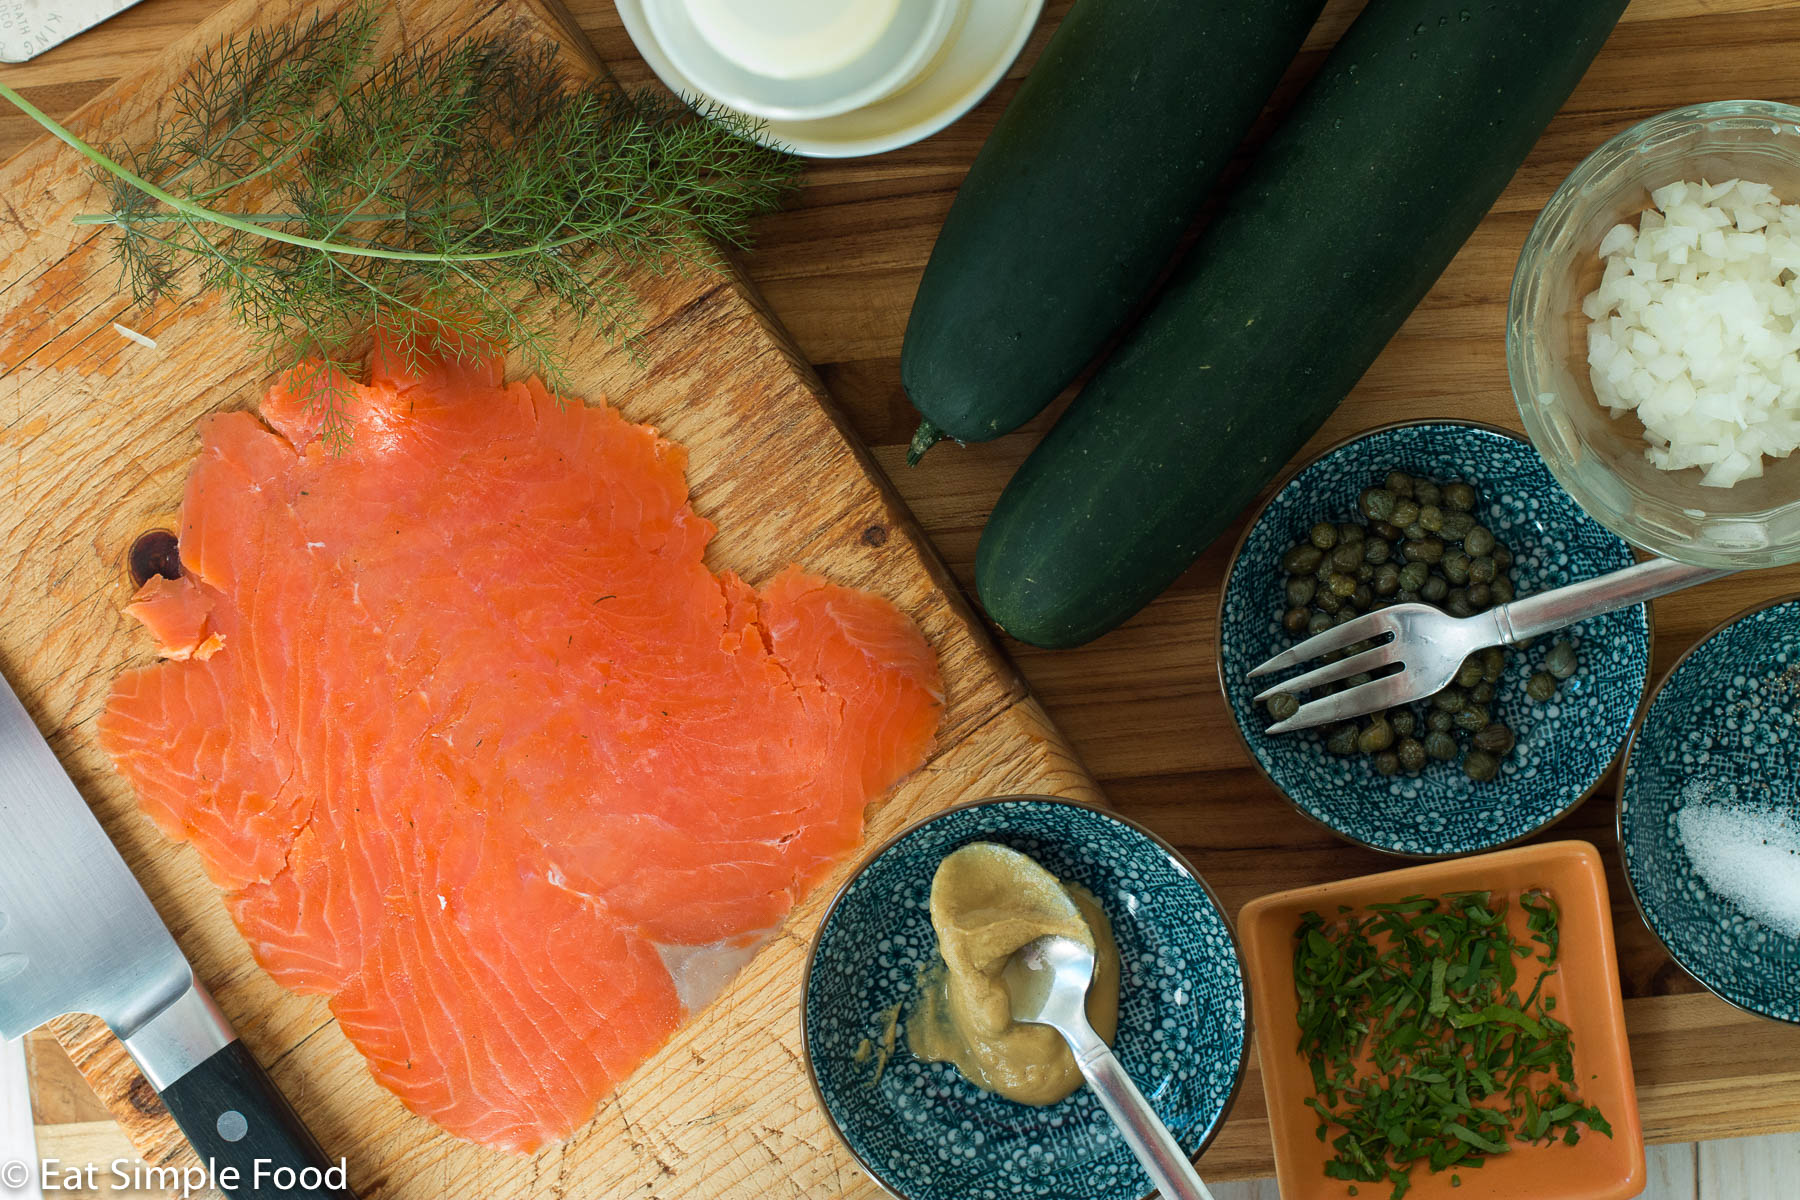 Ingredients on wood cutting board. Top down view of smoked salmon, whole cucumbers, bowl of capers, bowl of diced onions, dill sprigs, bowl of mustard, bowl of chopped parsley.